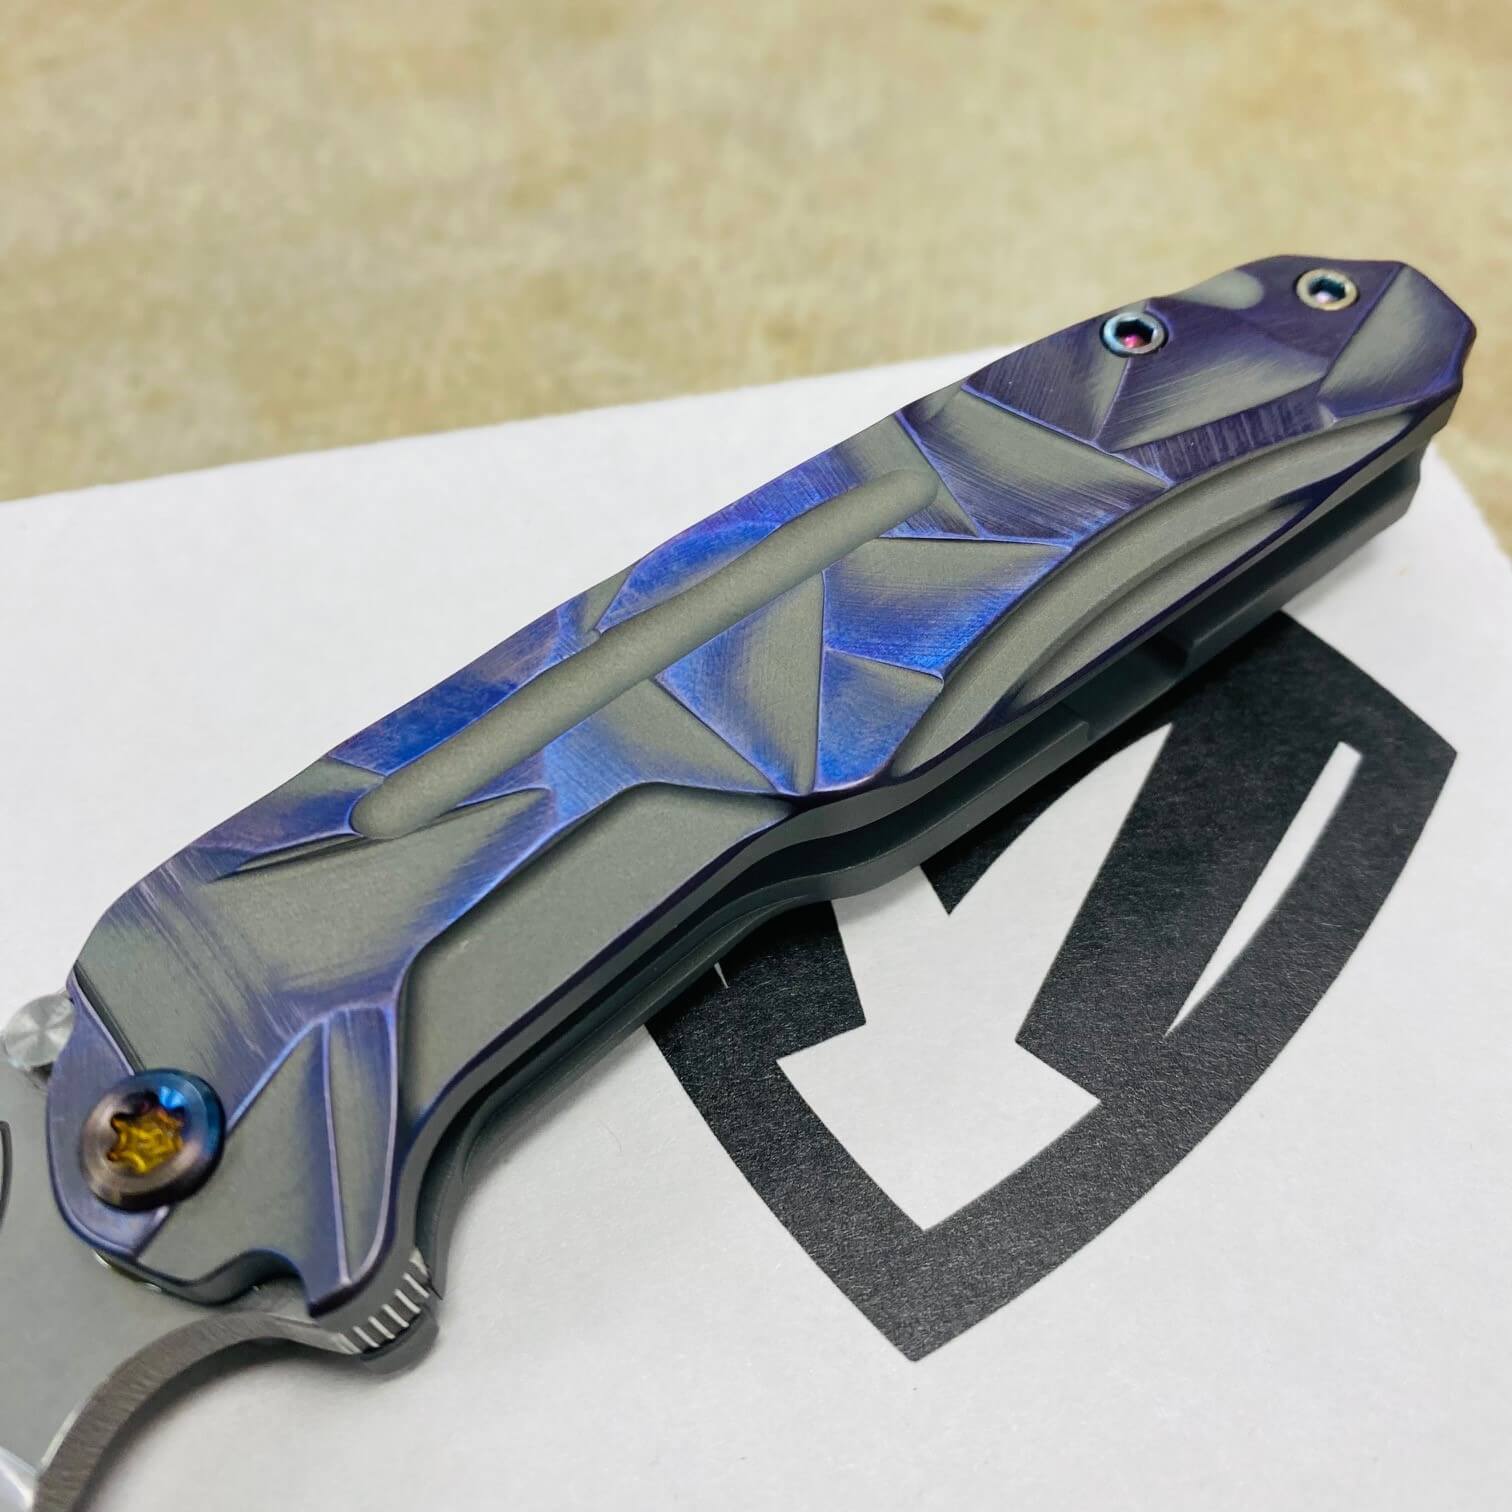 Medford Infraction S45VN 3.25" Tumbled Blade Bead Blasted Cement with Brushed Violet Stained Glass Handles Knife Serial 305-090 - MKT Infraction Cement Purple